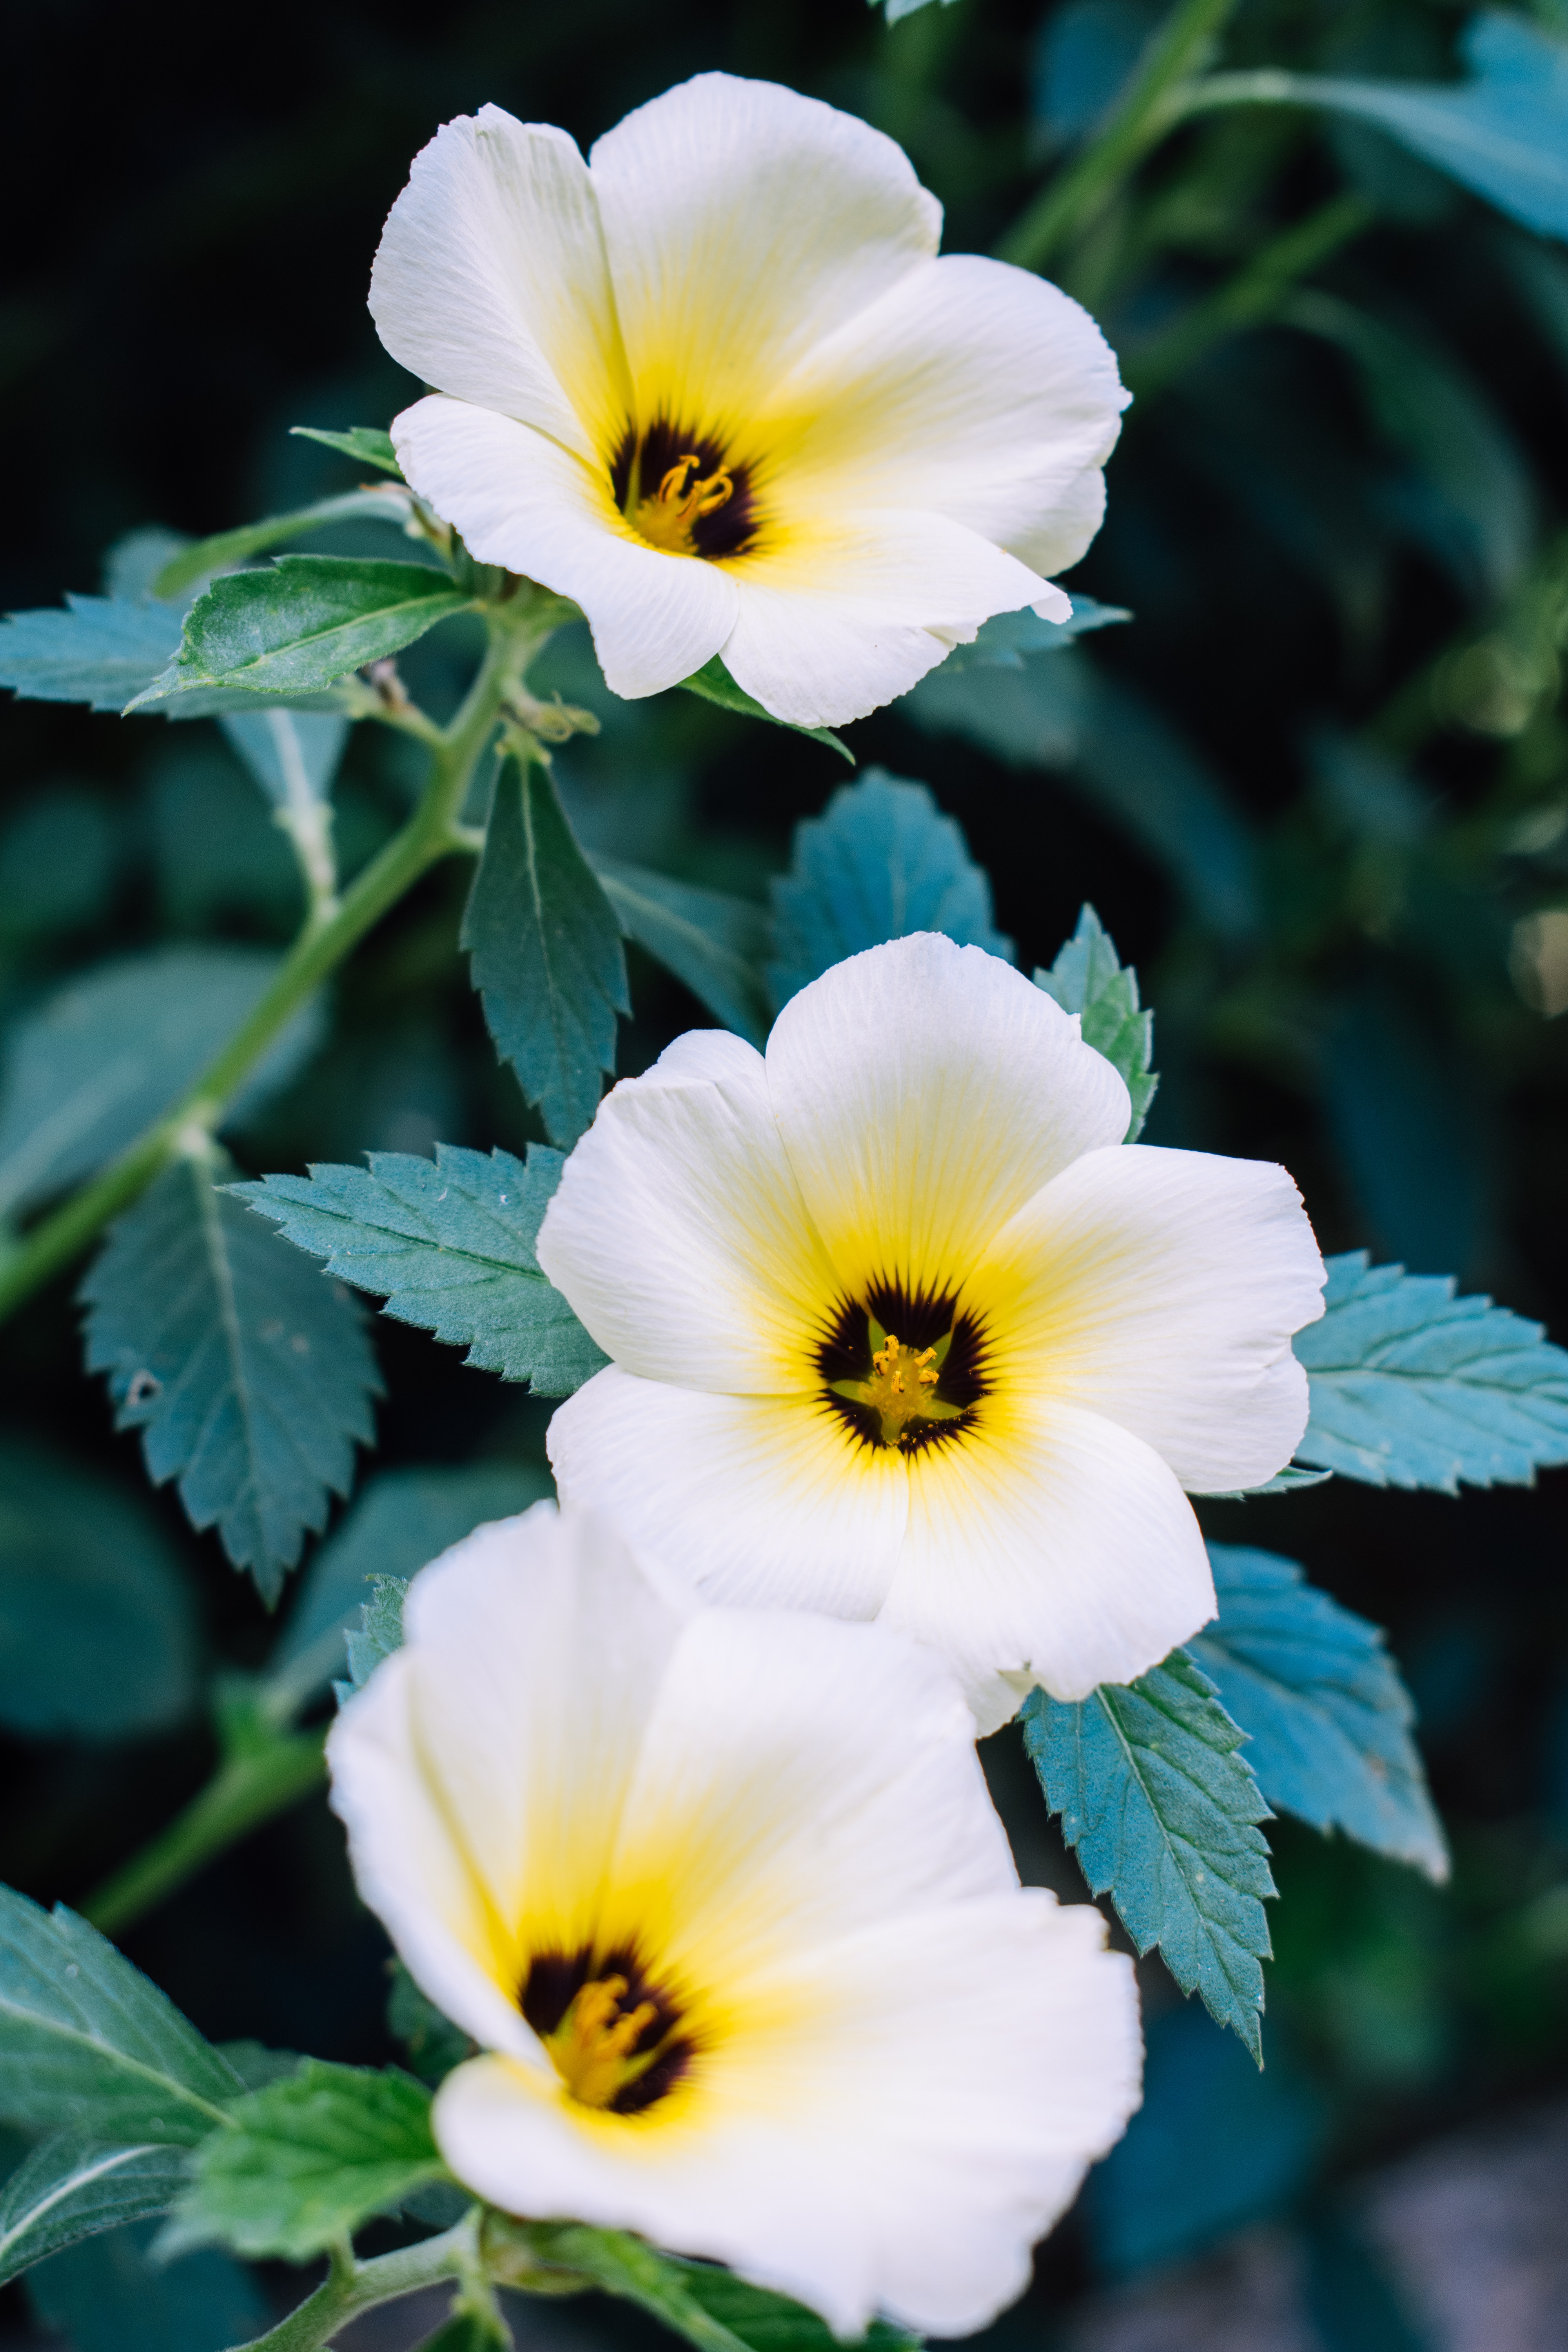 135238 download wallpaper flowers, pansies, white, plant screensavers and pictures for free